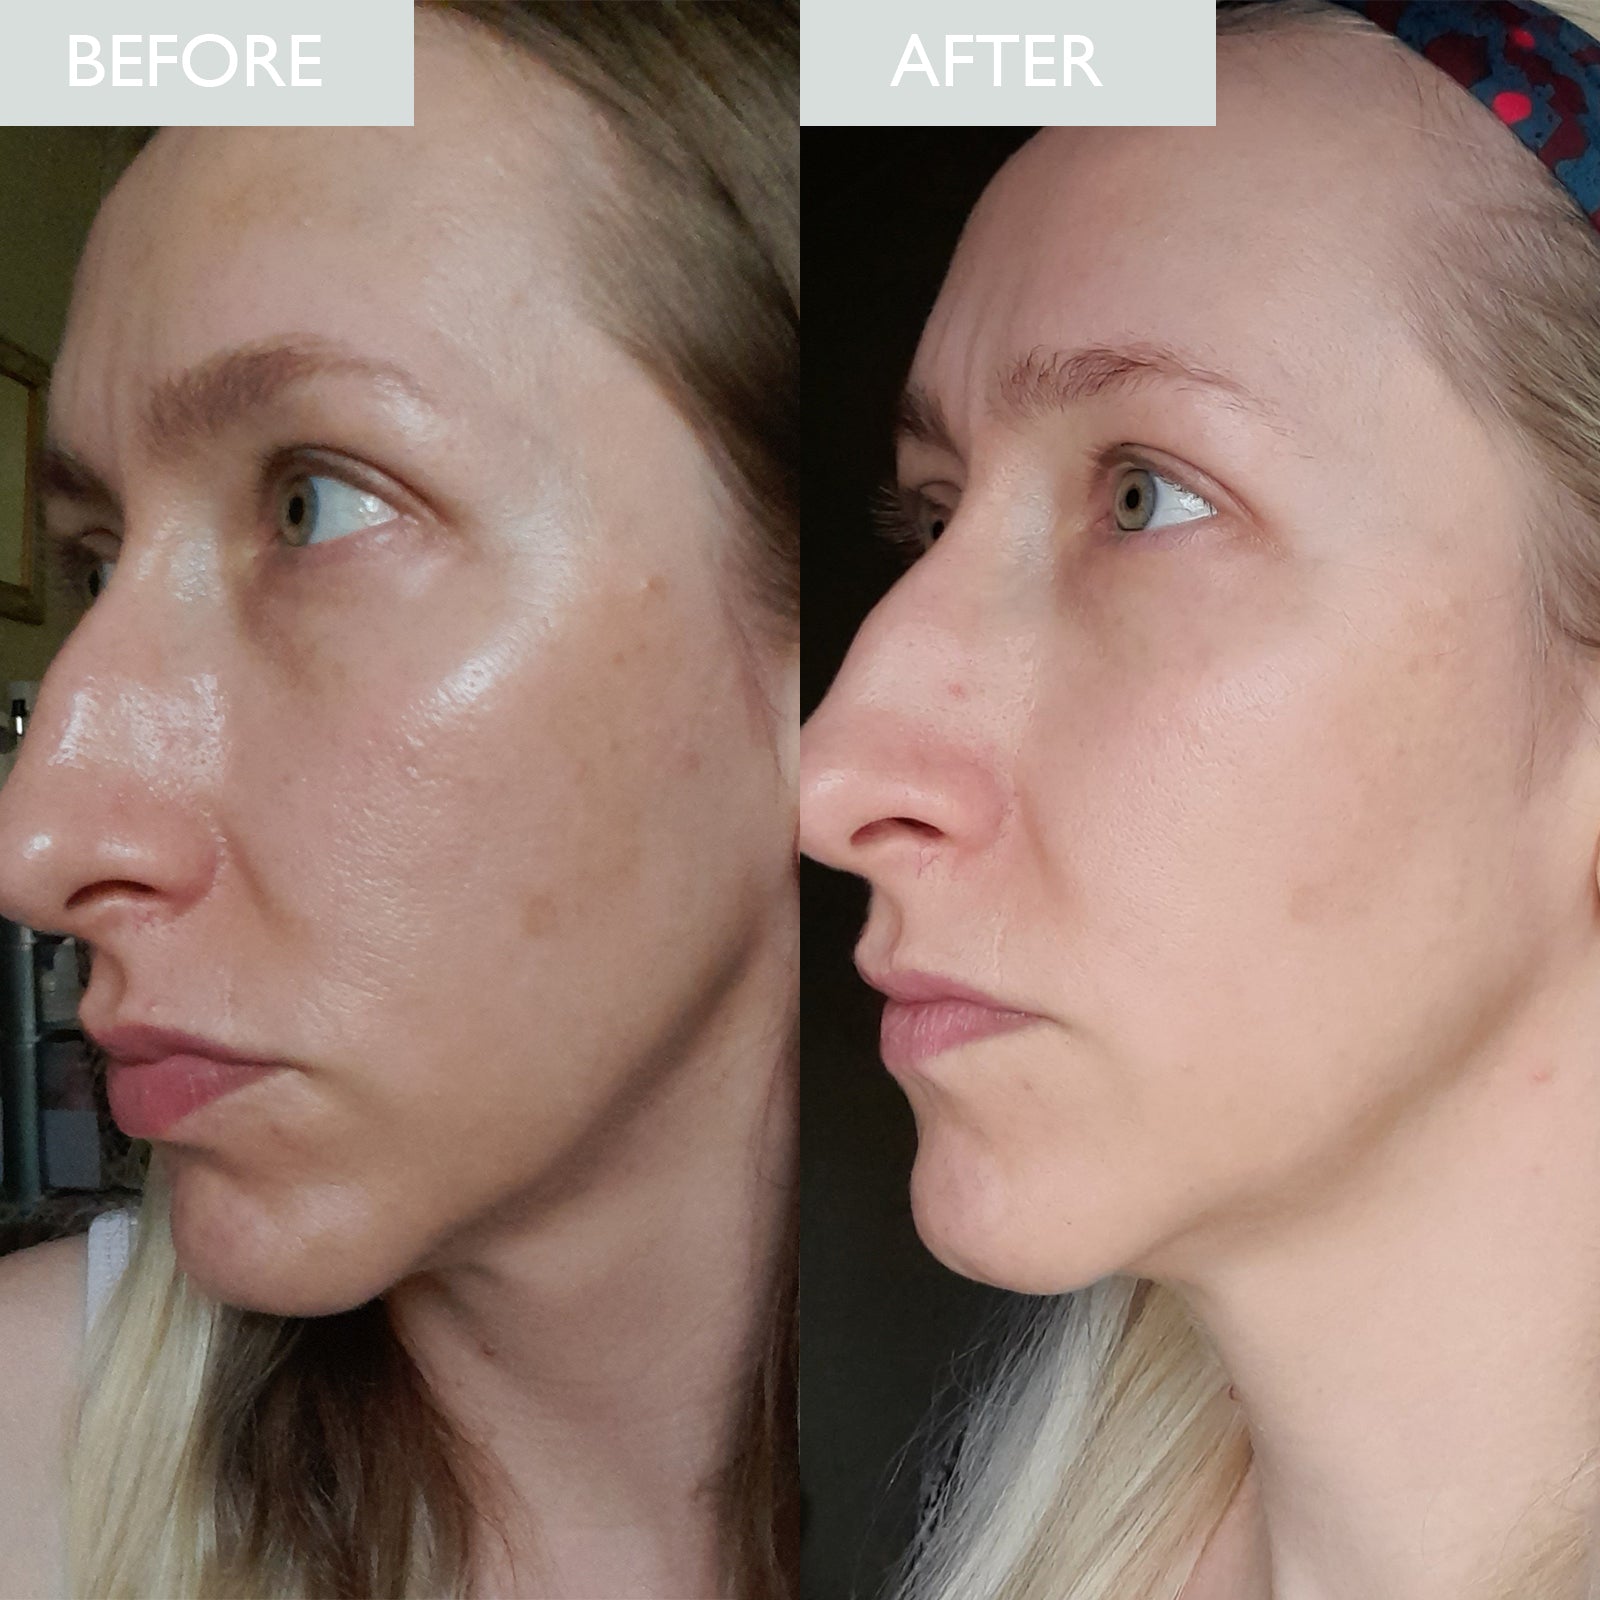 Before and After Image of a lady with oily skin.  Improvement shown from using this oily skin skincare set 